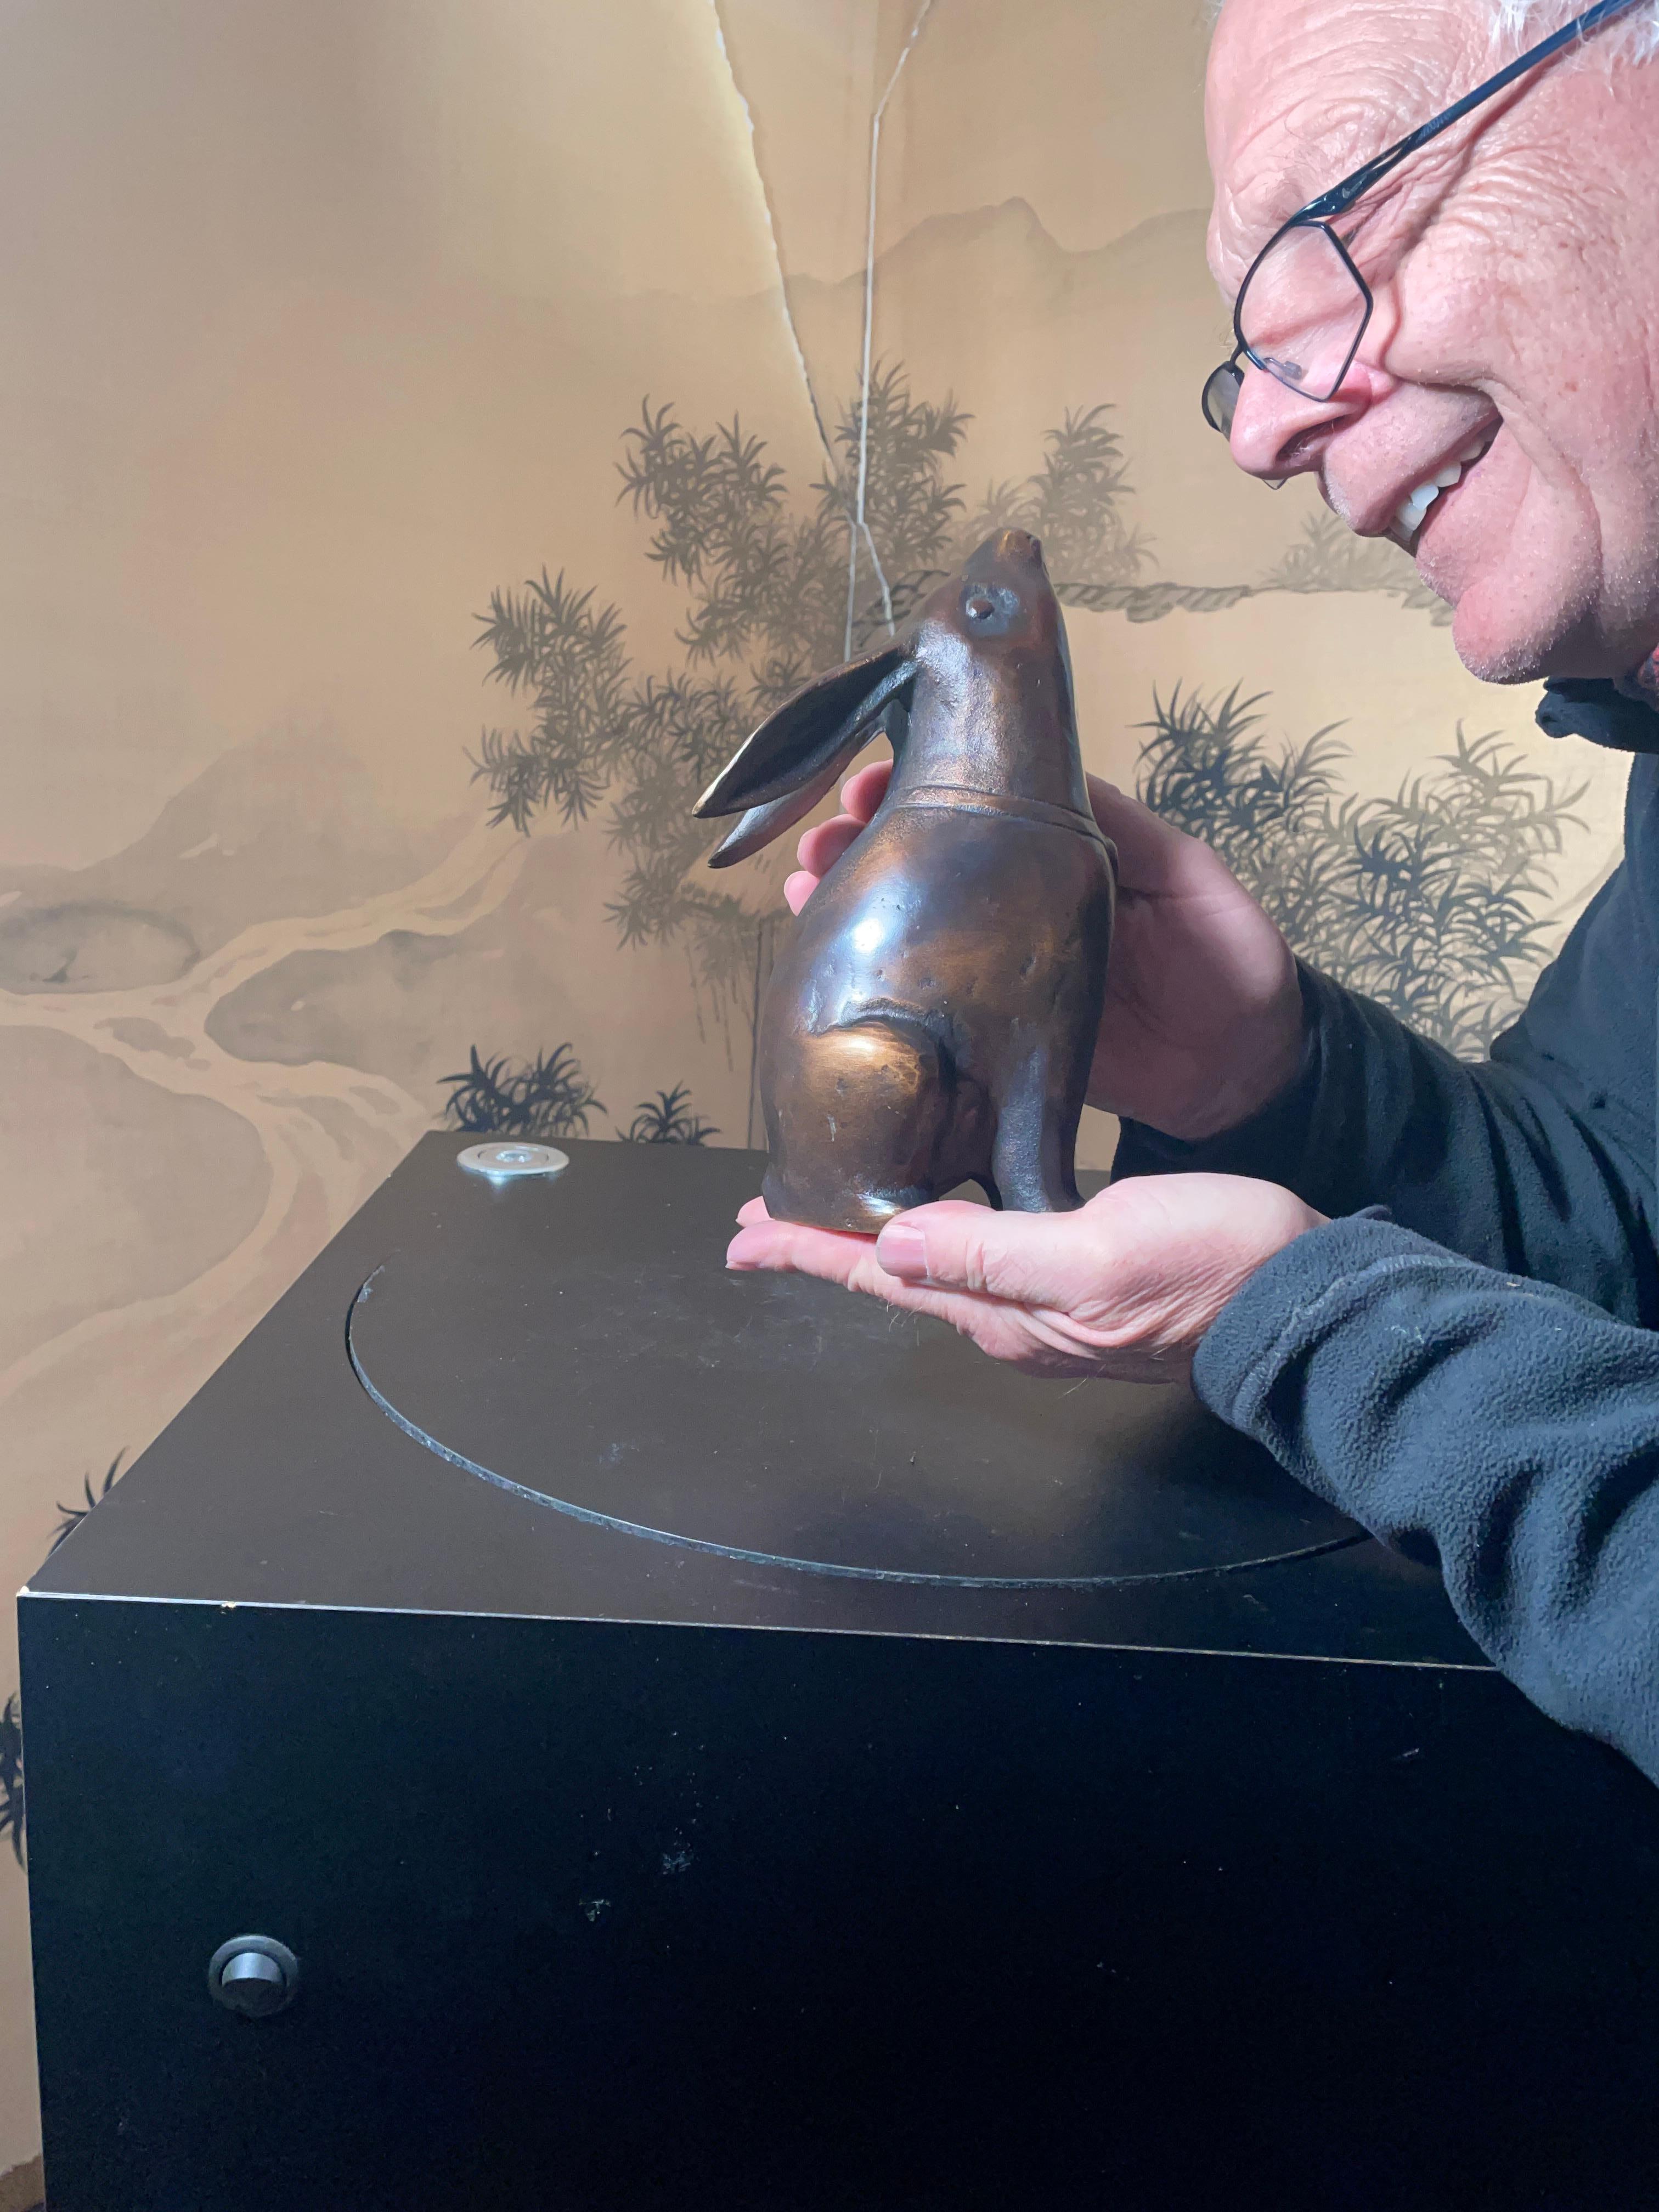 For your special garden spot - a tall smooth bronze finish Moon Gazing Rabbit with its signature lengthy floppy ears.

This is a hard to find and finely cast effigy of a tall 